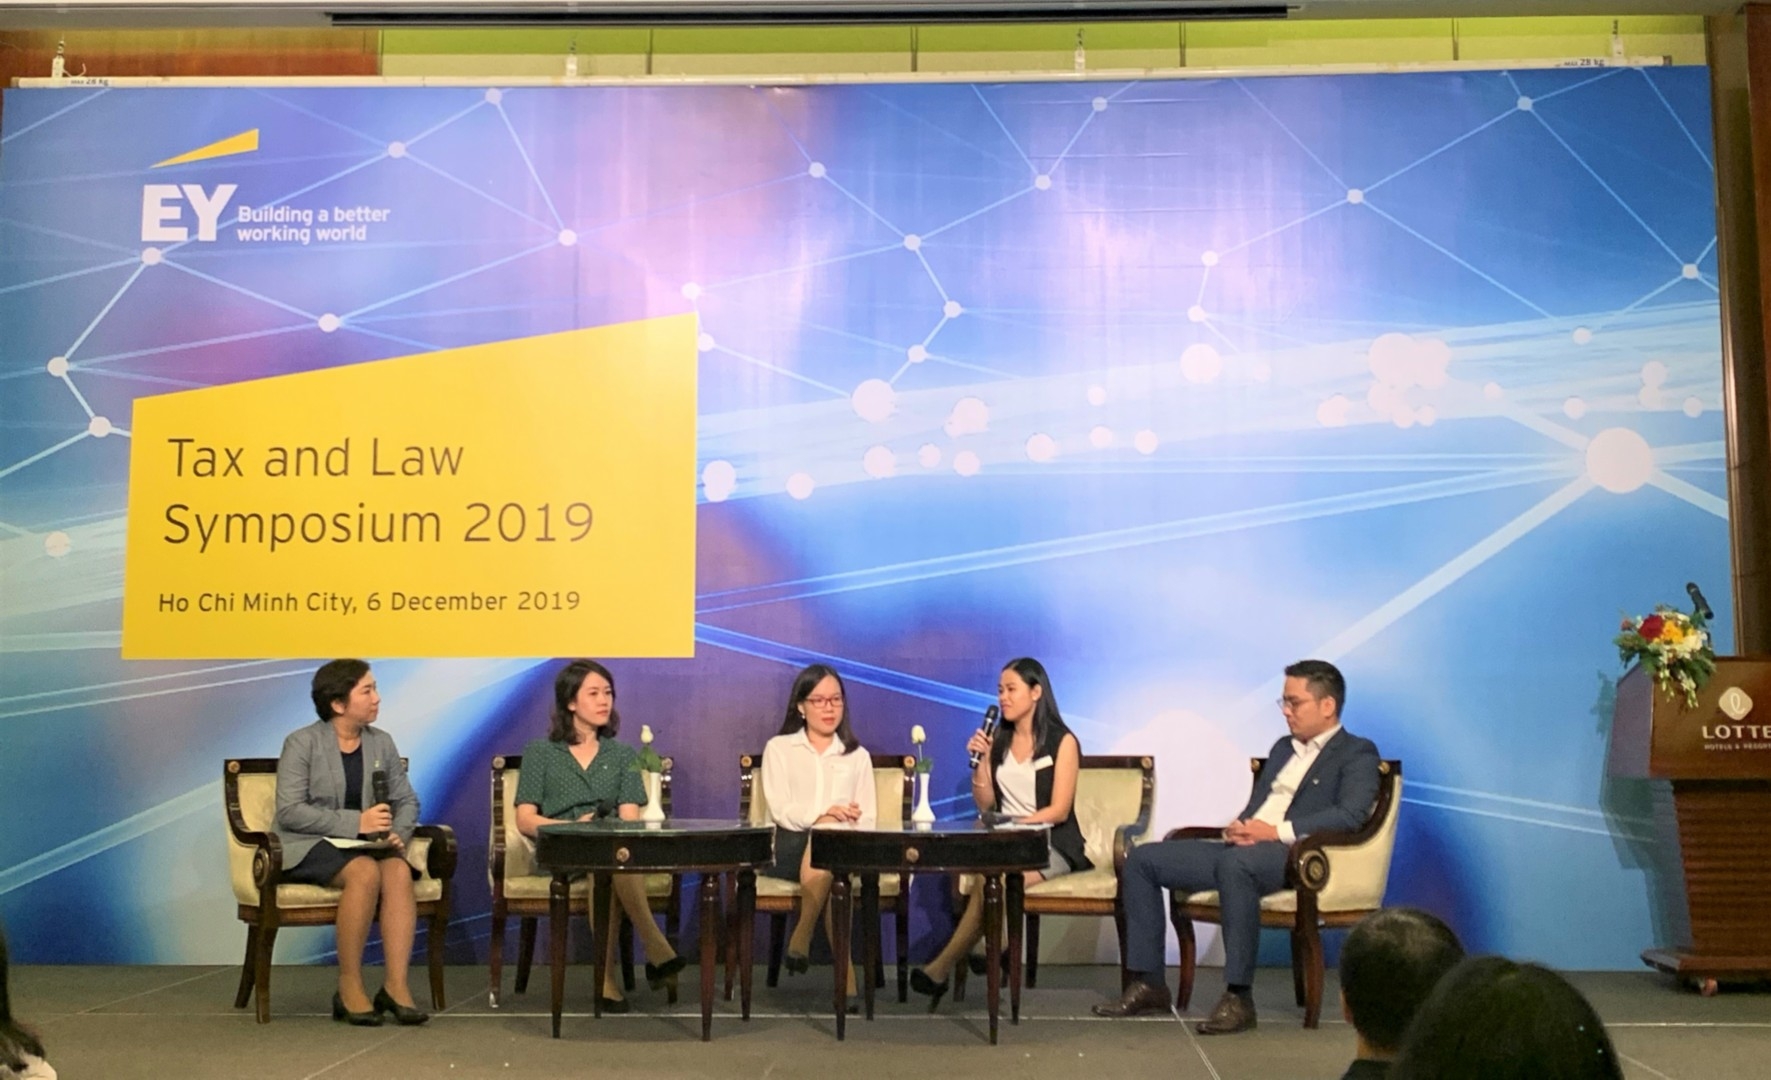 EY Consulting Vietnam: enterprises need to prepare for tax changes